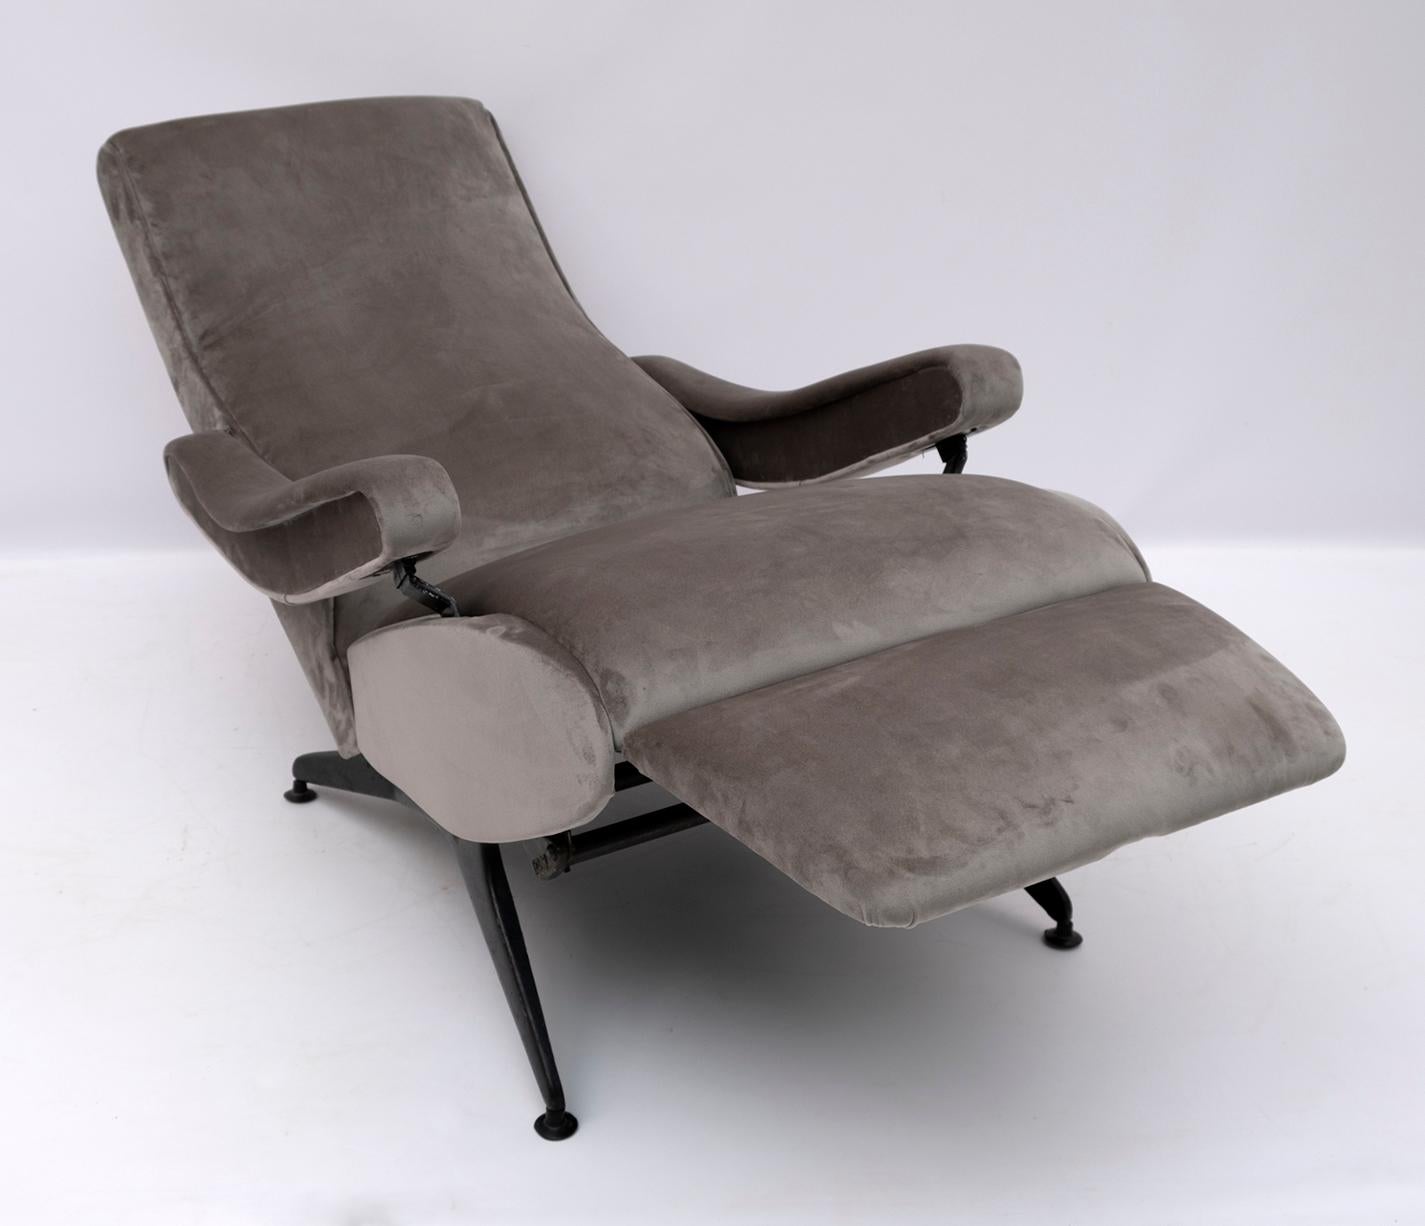 Reclining armchair designed by Nello Pini for the Oscar Gigante furniture factory, 1950s, the armchair has been restored and upholstered in gray velvet

The elongated armchair measures 152 cm.